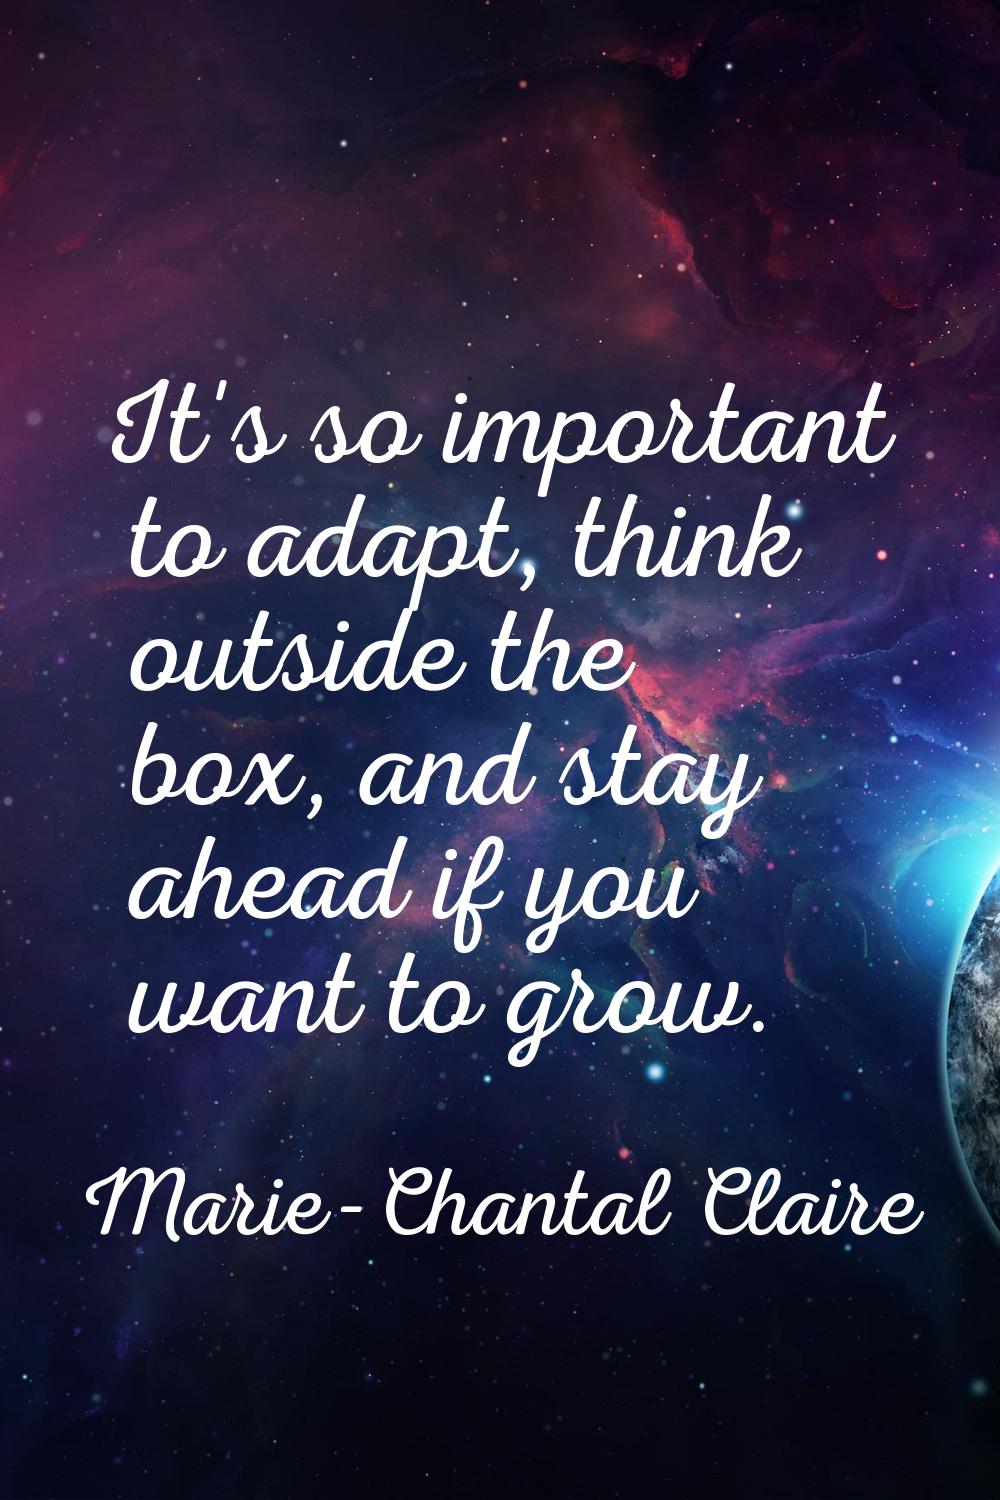 It's so important to adapt, think outside the box, and stay ahead if you want to grow.